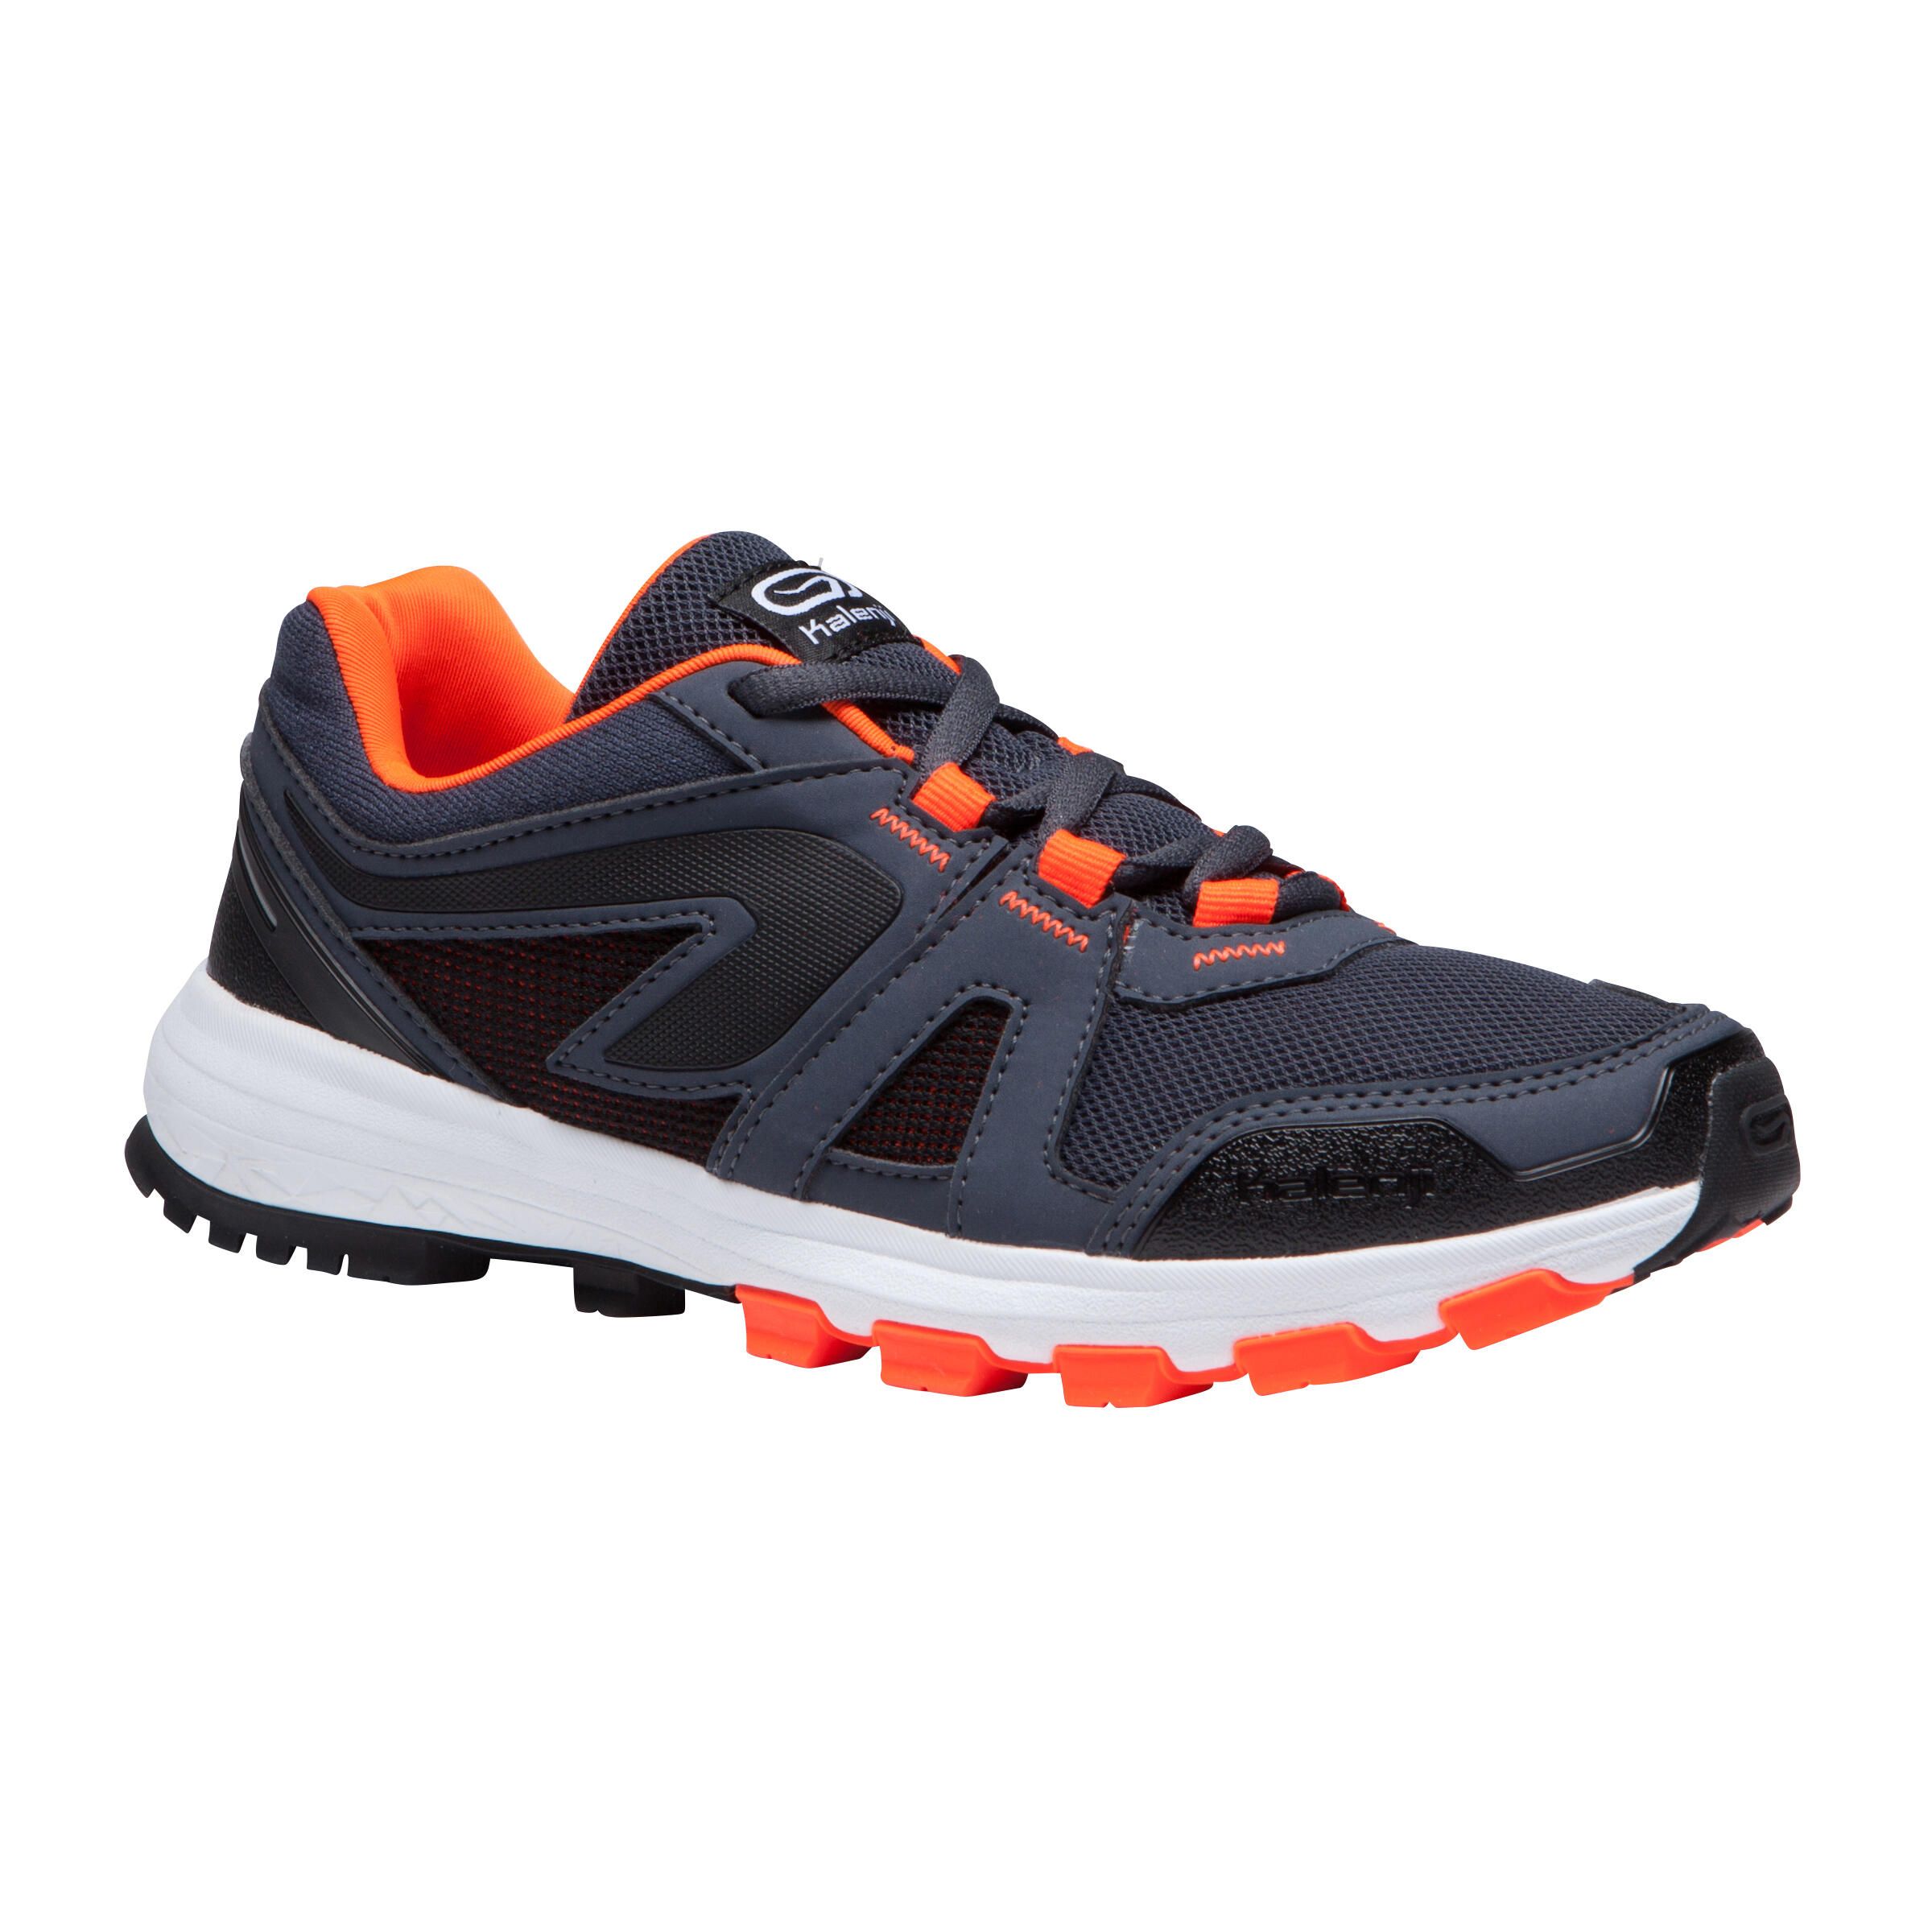 Kids Shoes online at Decathlon India